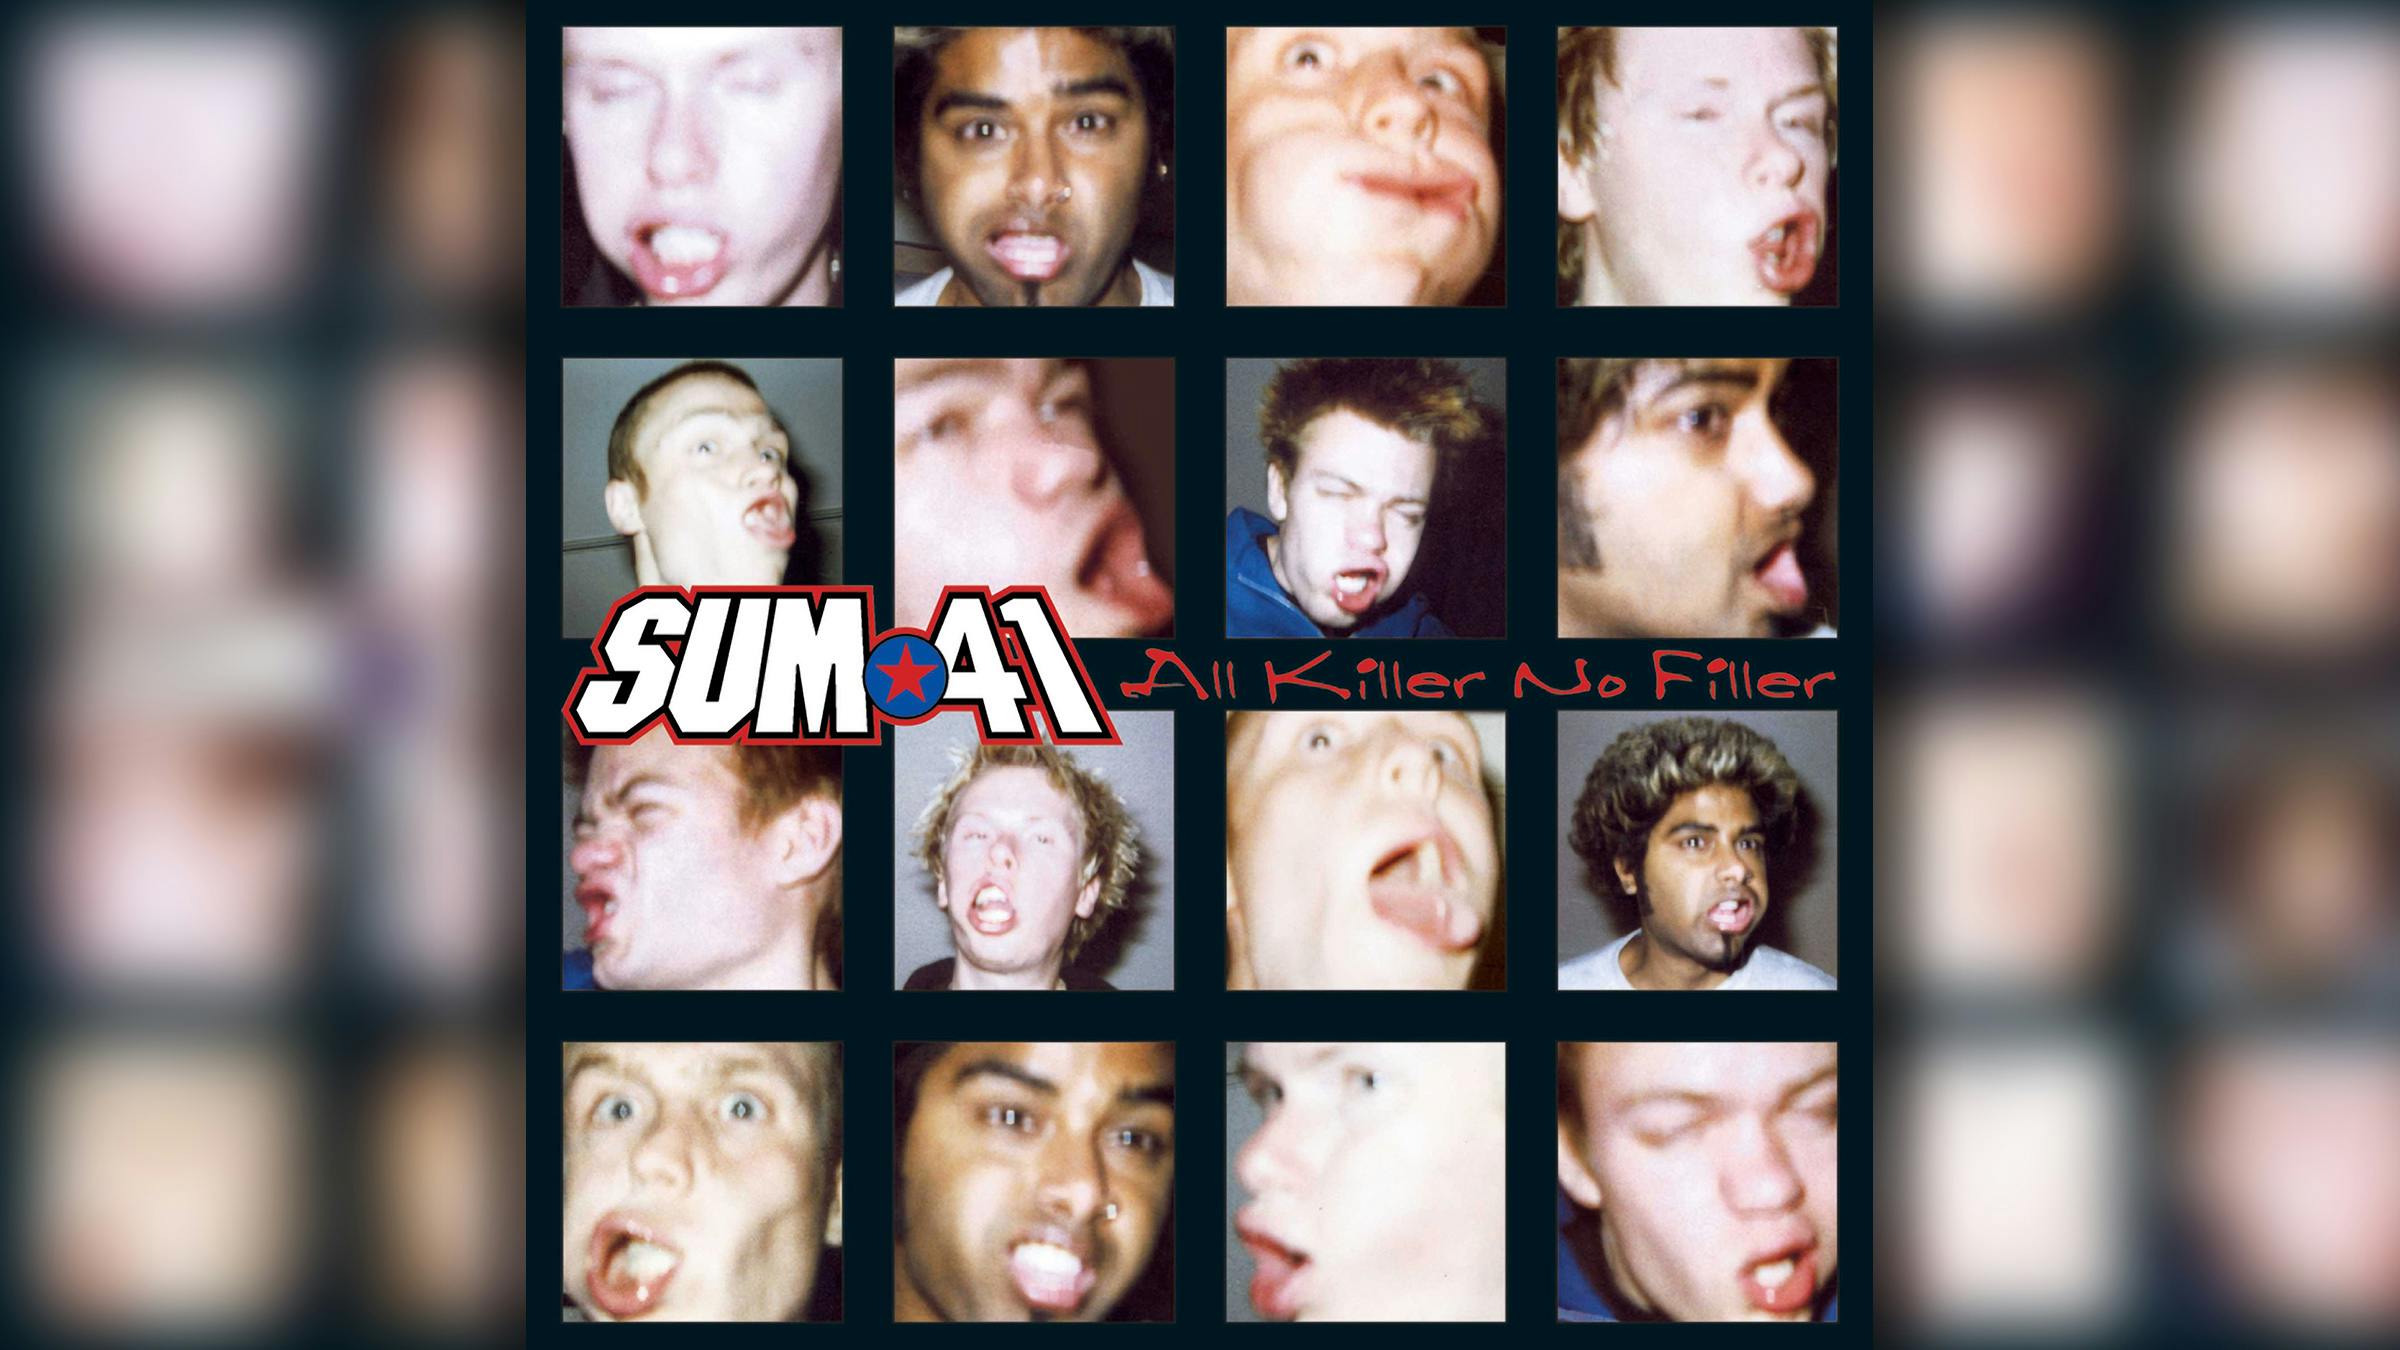 Tomorrow: Sum 41 Reveal The True Story Of Their Smash Debut On Our Podcast